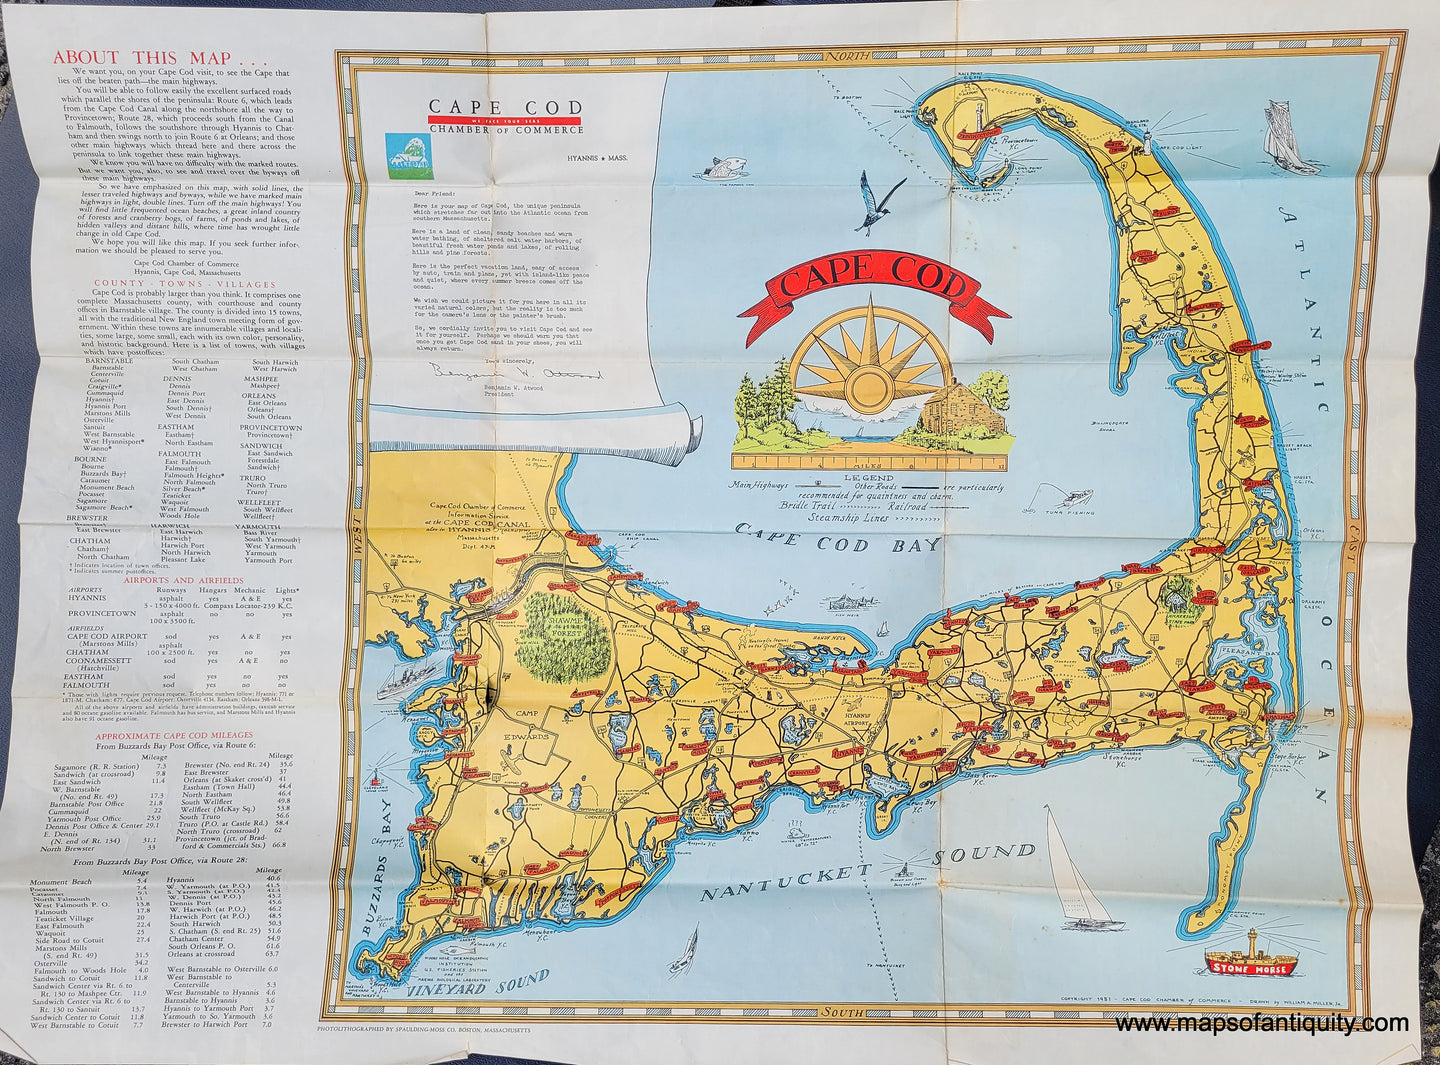 Vintage-Antique-Folding-Map-Cape-Cod--US-Massachusetts-Cape-Cod-and-Islands-1951-Cape-Cod-Chamber-of-Commerce--1950s-tourist-tourism-travel-fun-driving-roadtrip-map-Maps-Of-Antiquity